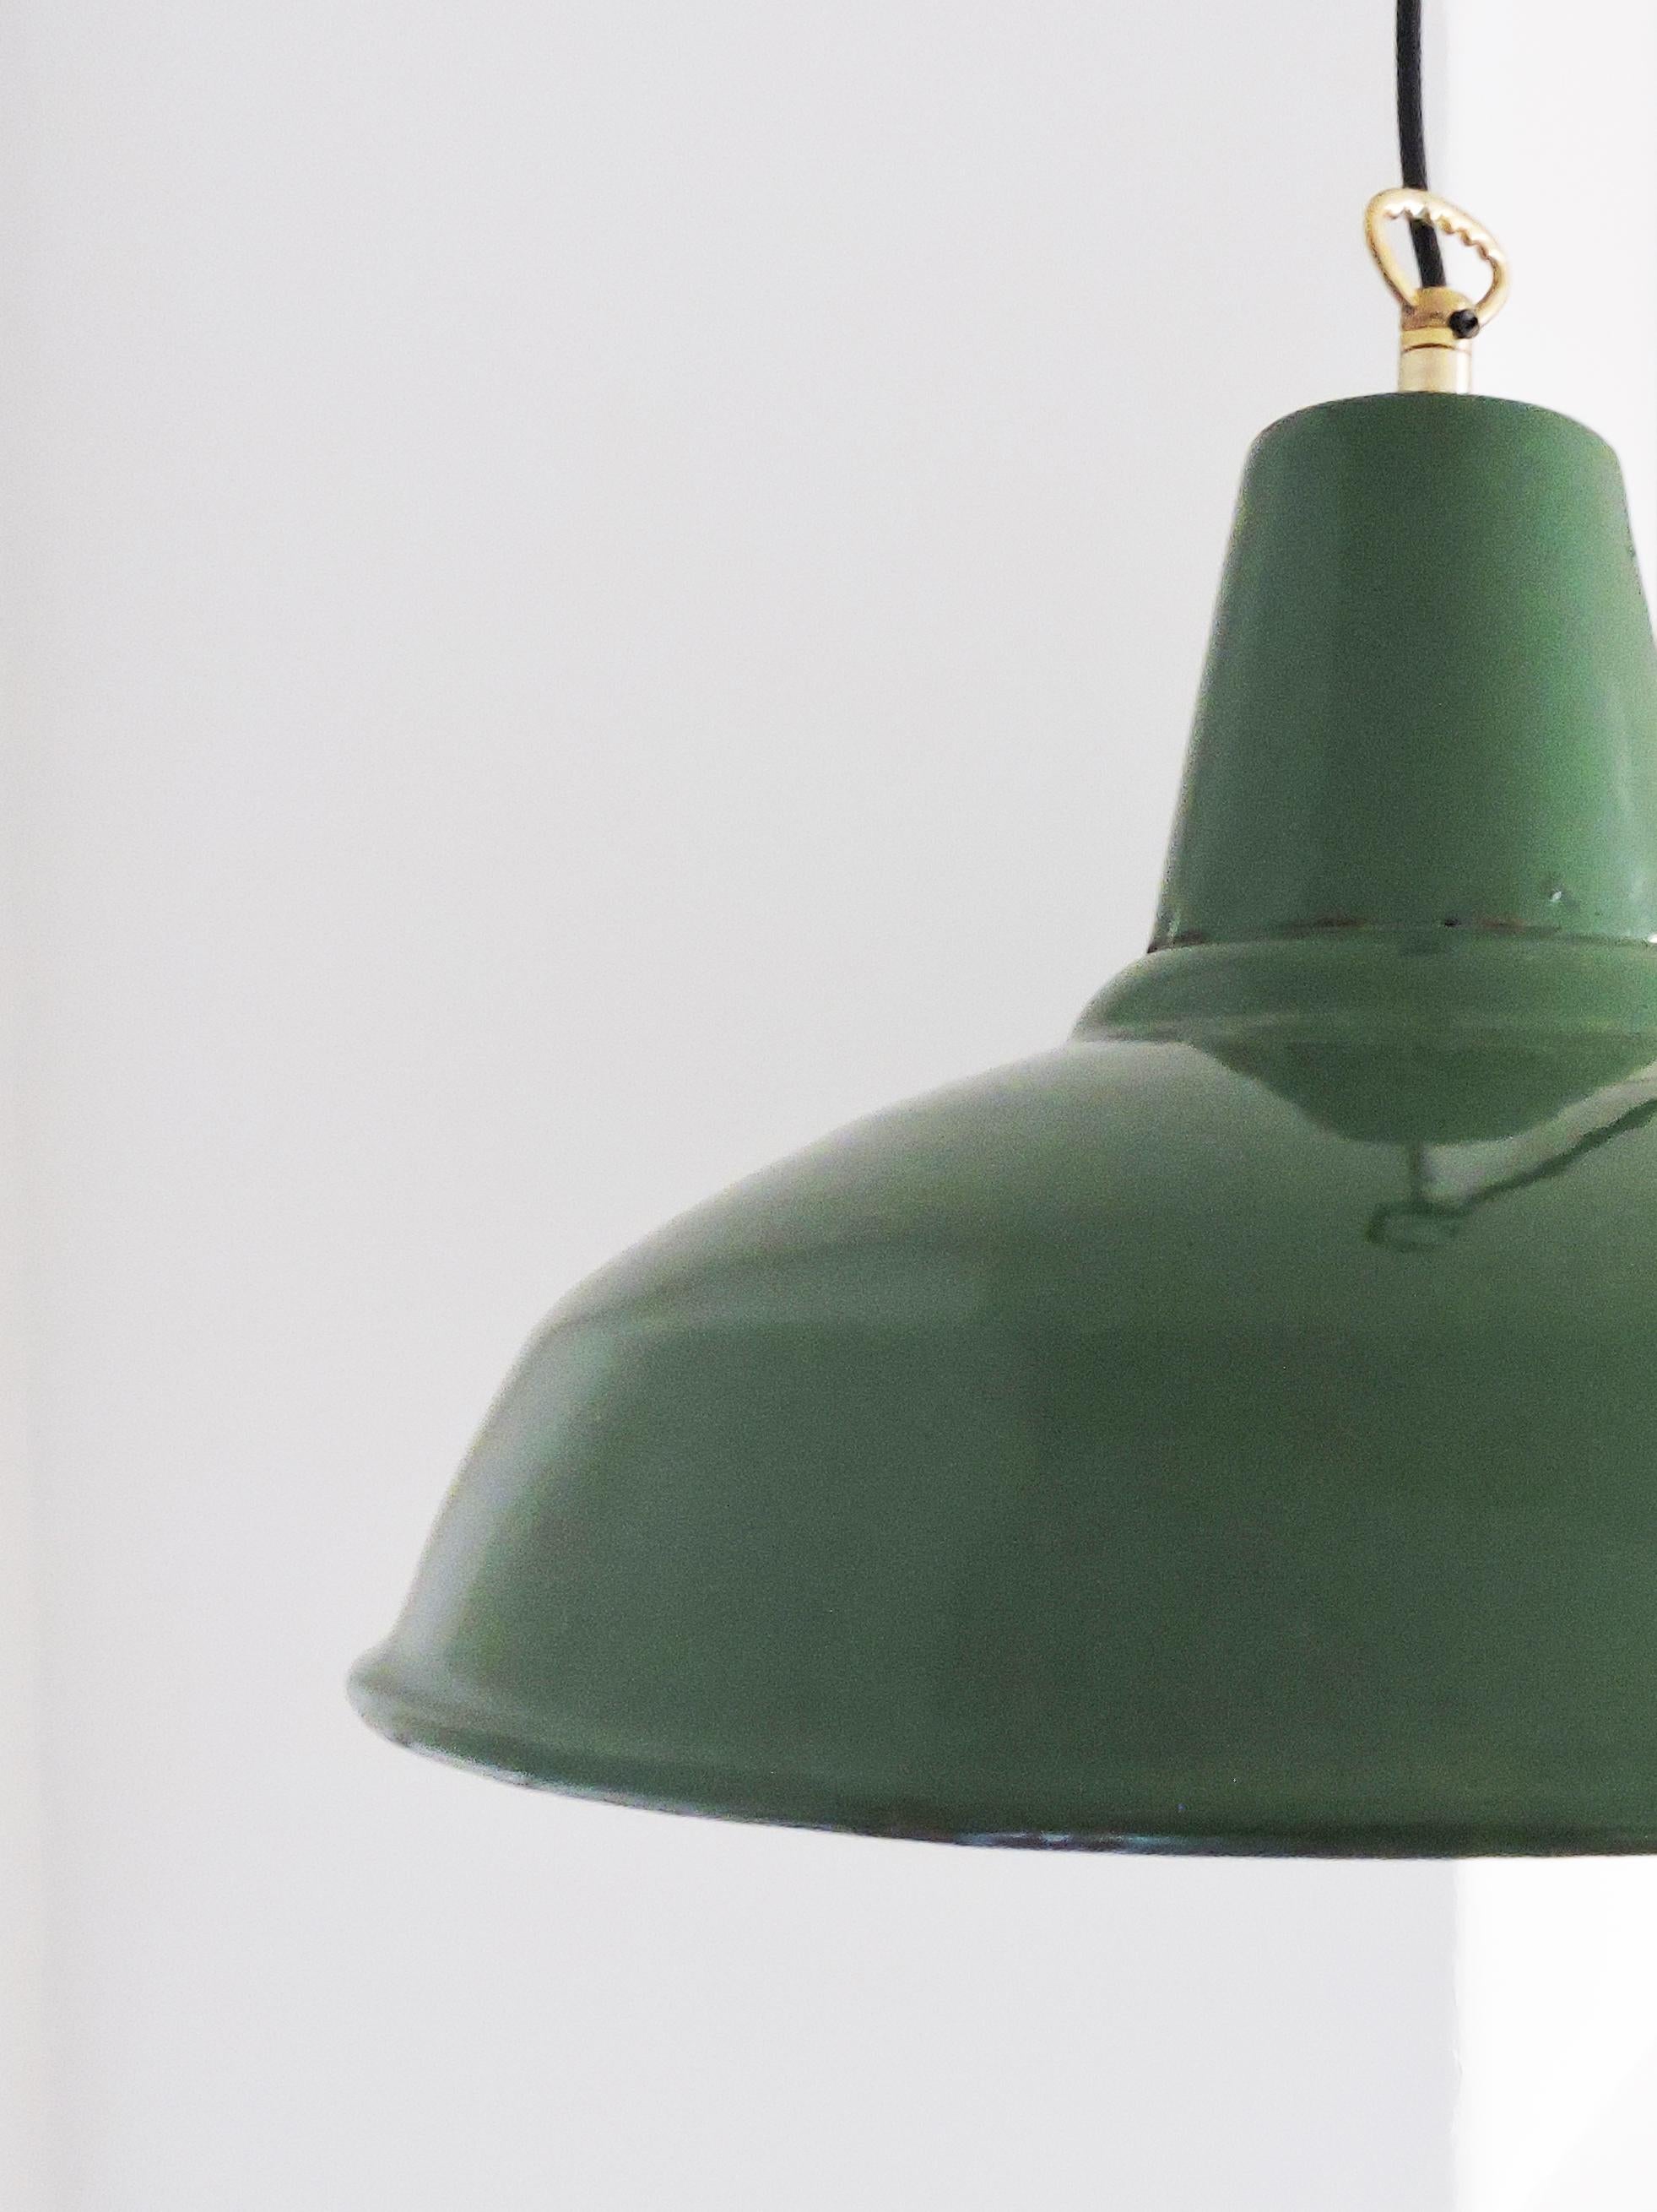 A 1950s midcentury green industrial pendant light, 1950s. The light features a brass hook and hangs from black wire.

A professional electrician has rewired this piece to be in working order.
Plug Type - UK Plug (up to 250V).